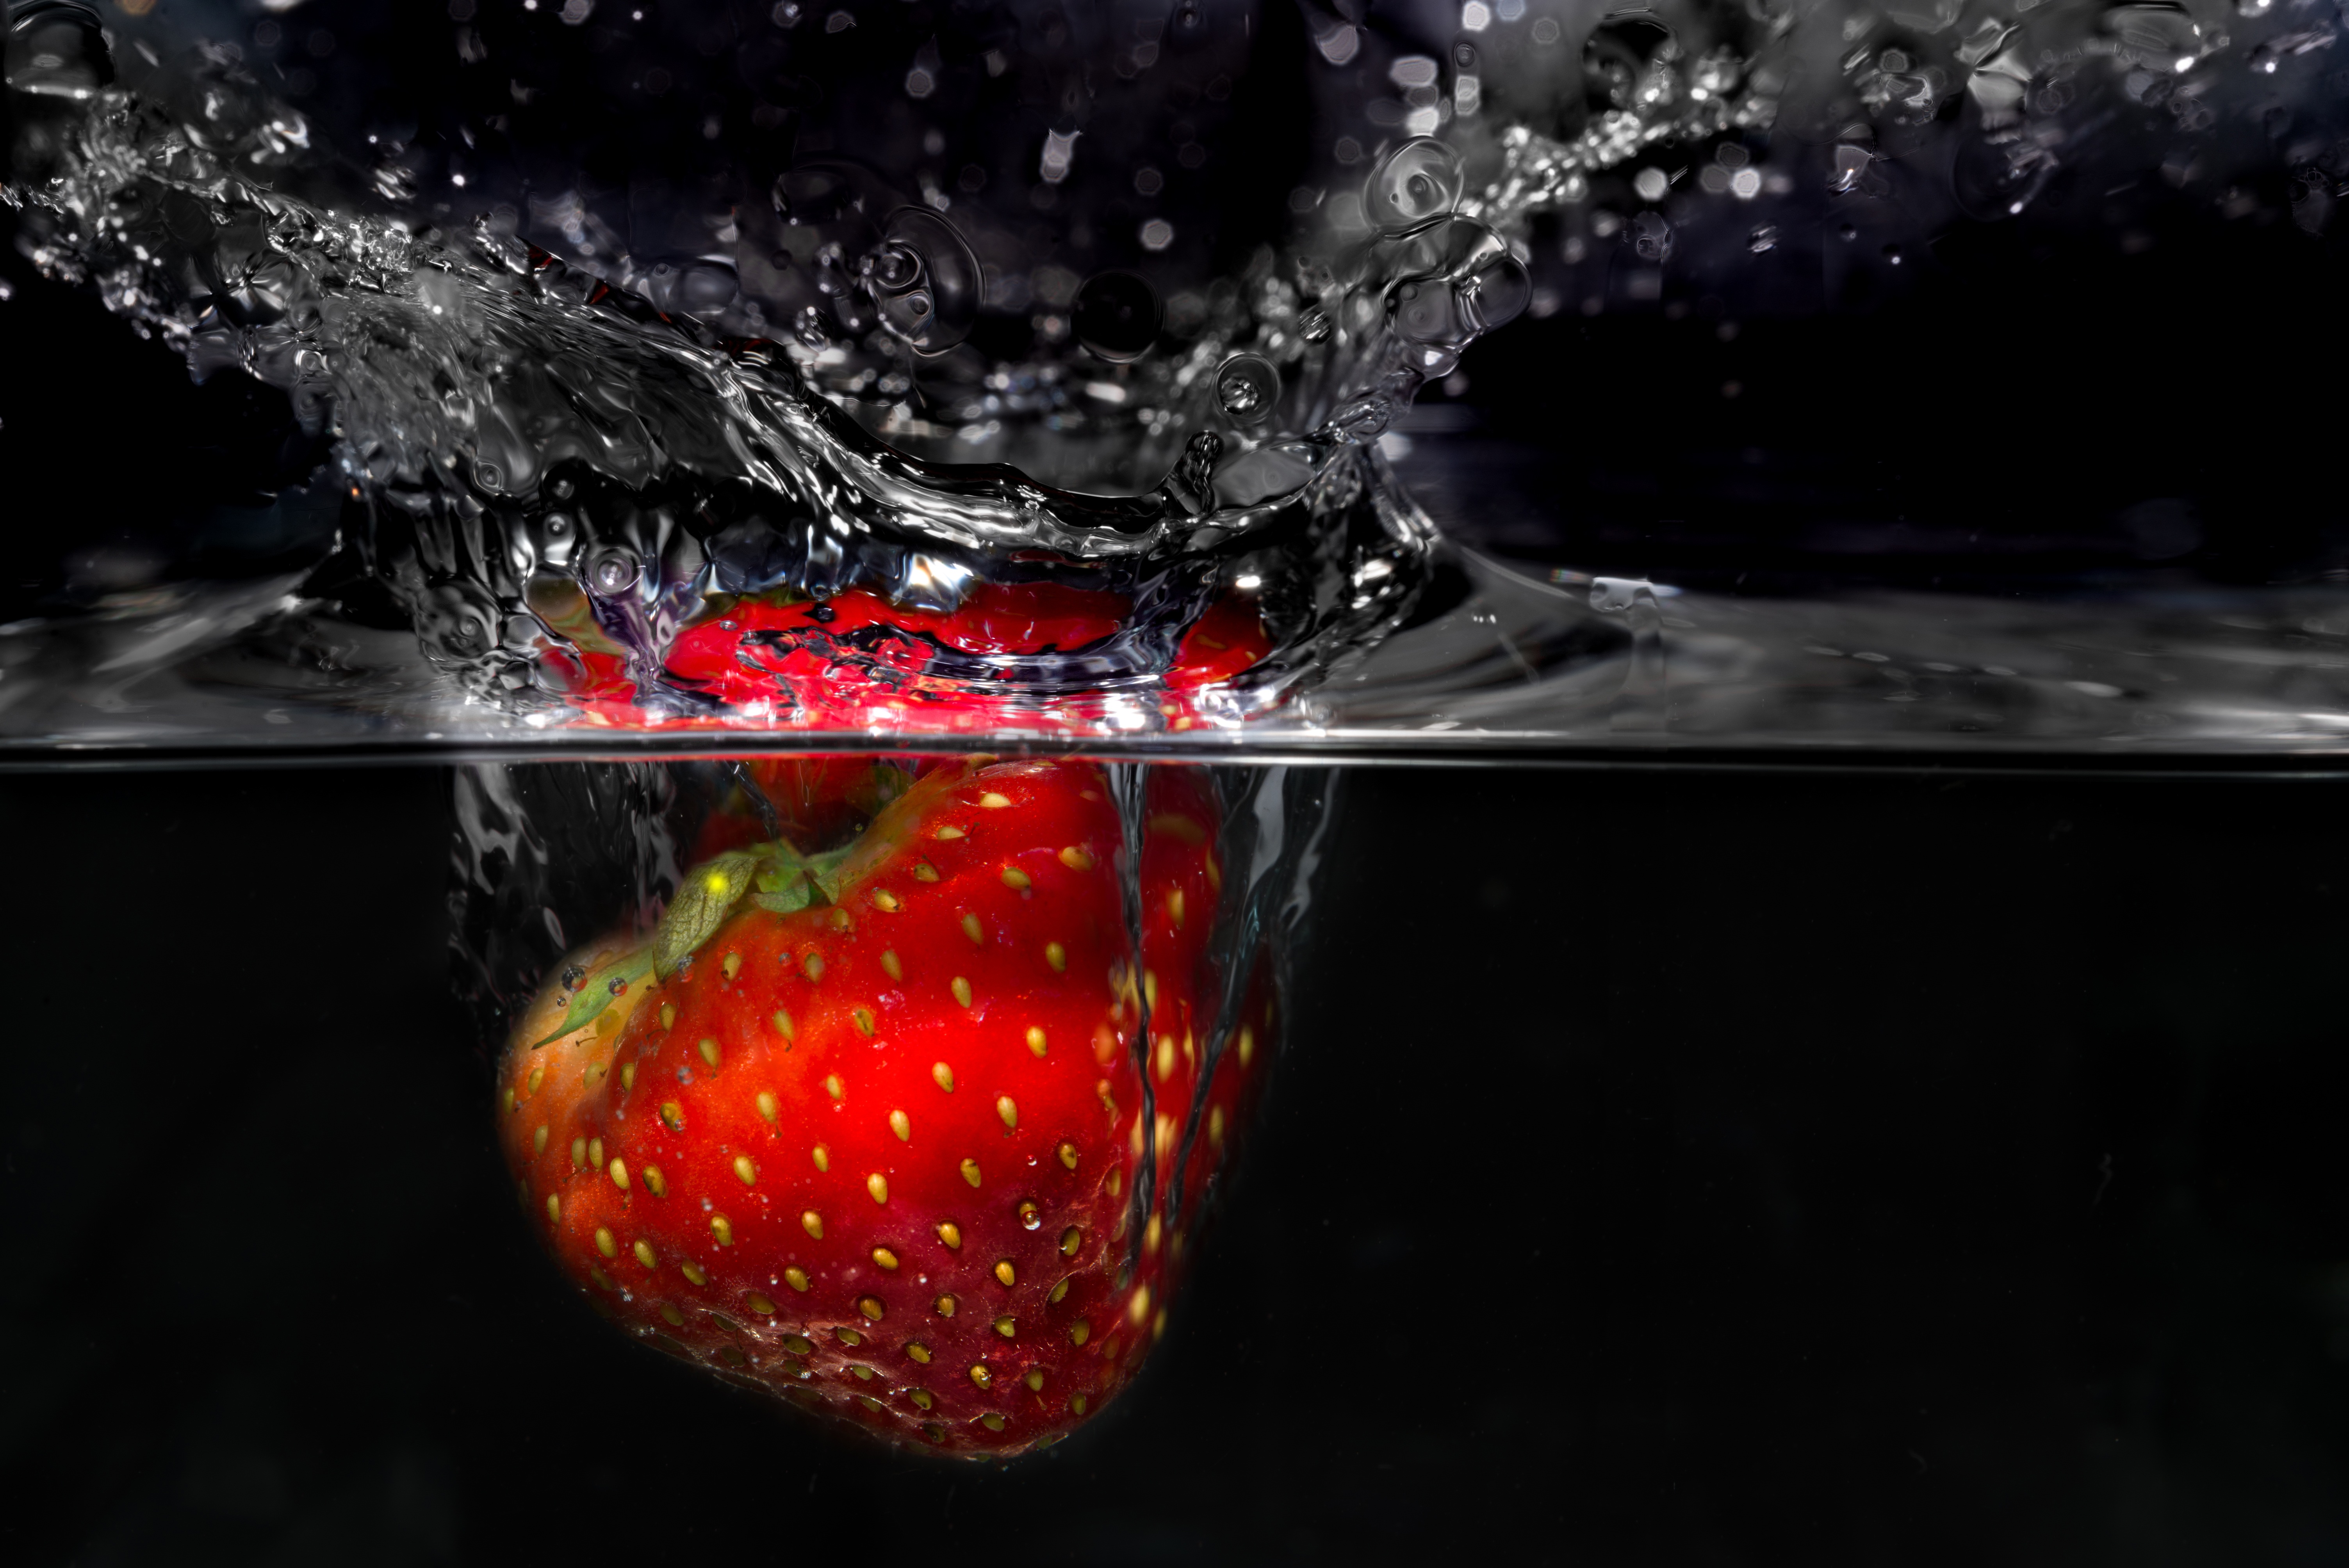 154154 download wallpaper strawberry, macro, spray, splash, berry screensavers and pictures for free